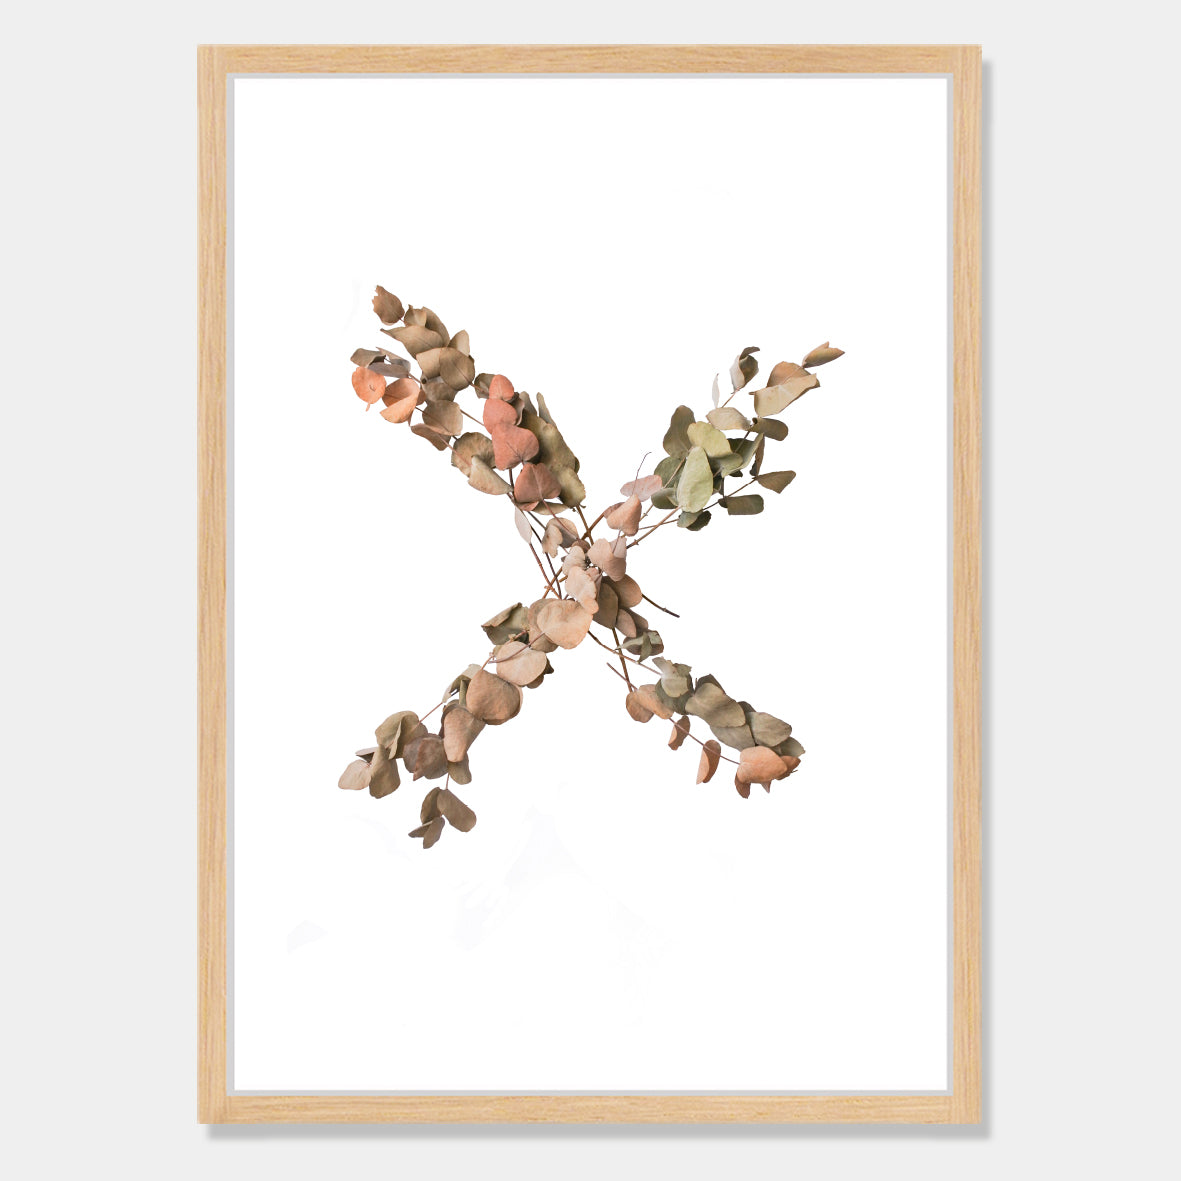 Photographic art print of dried leaves in a X shape by Bon Jung. Printed in New Zealand by endemicworld and framed in raw oak.